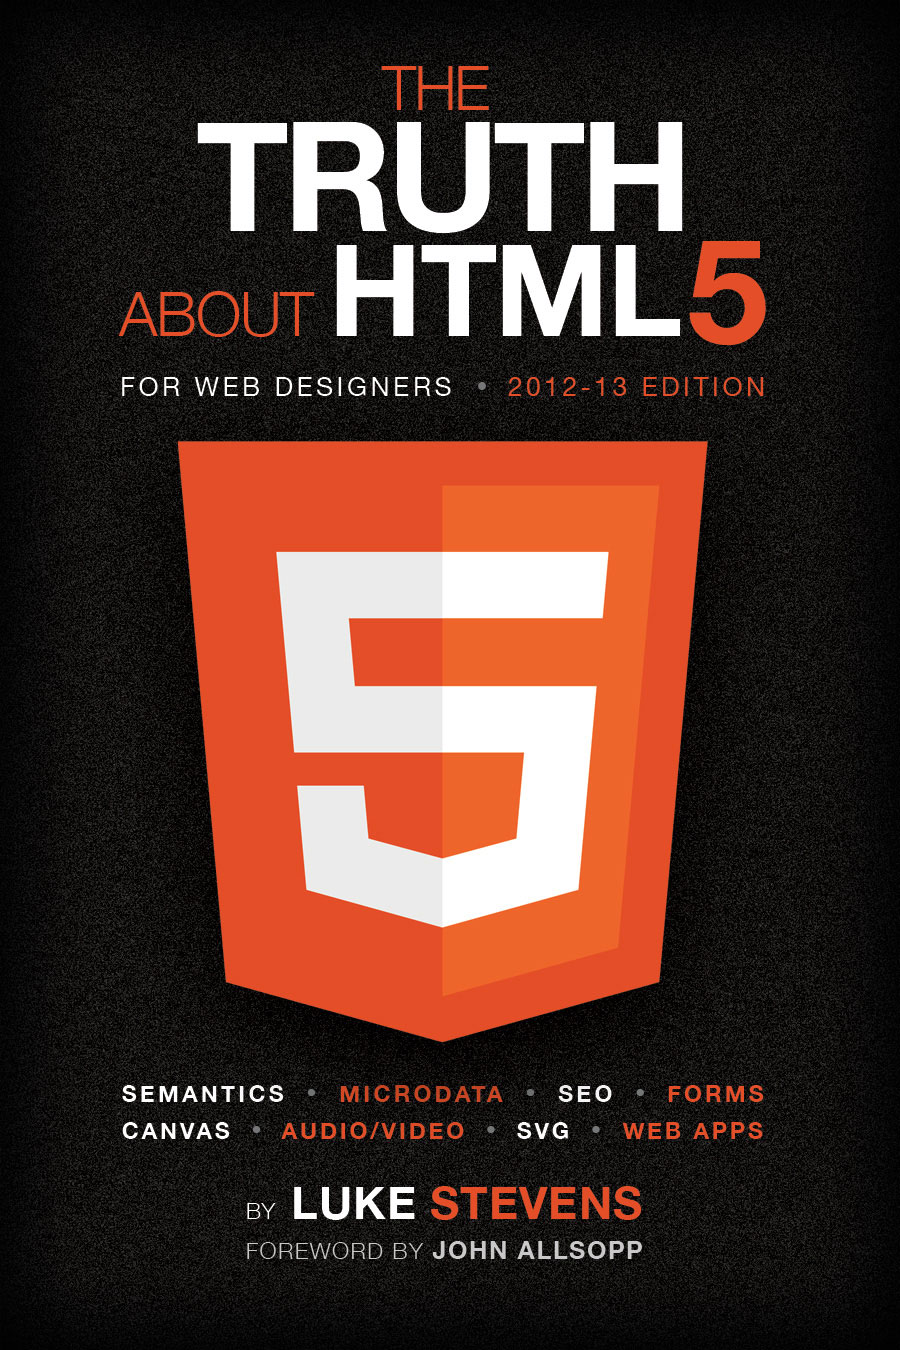 The Truth About HTML5 (For Web Designers)